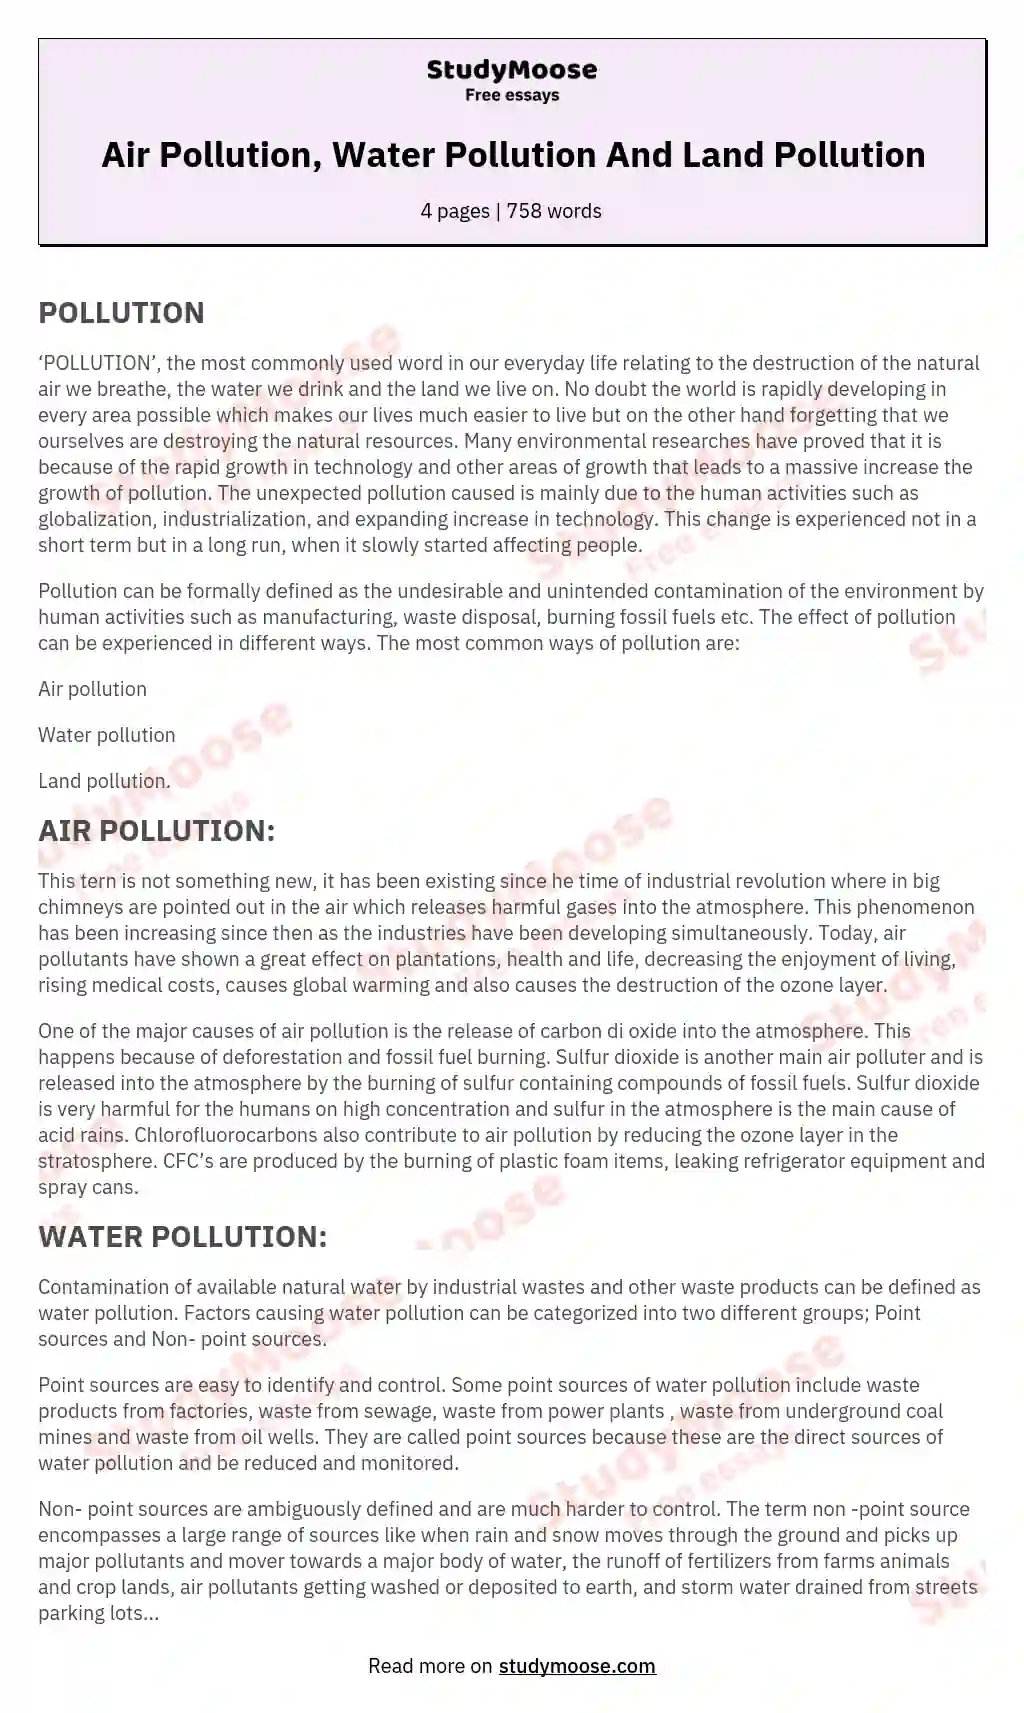 Air Pollution, Water Pollution And Land Pollution